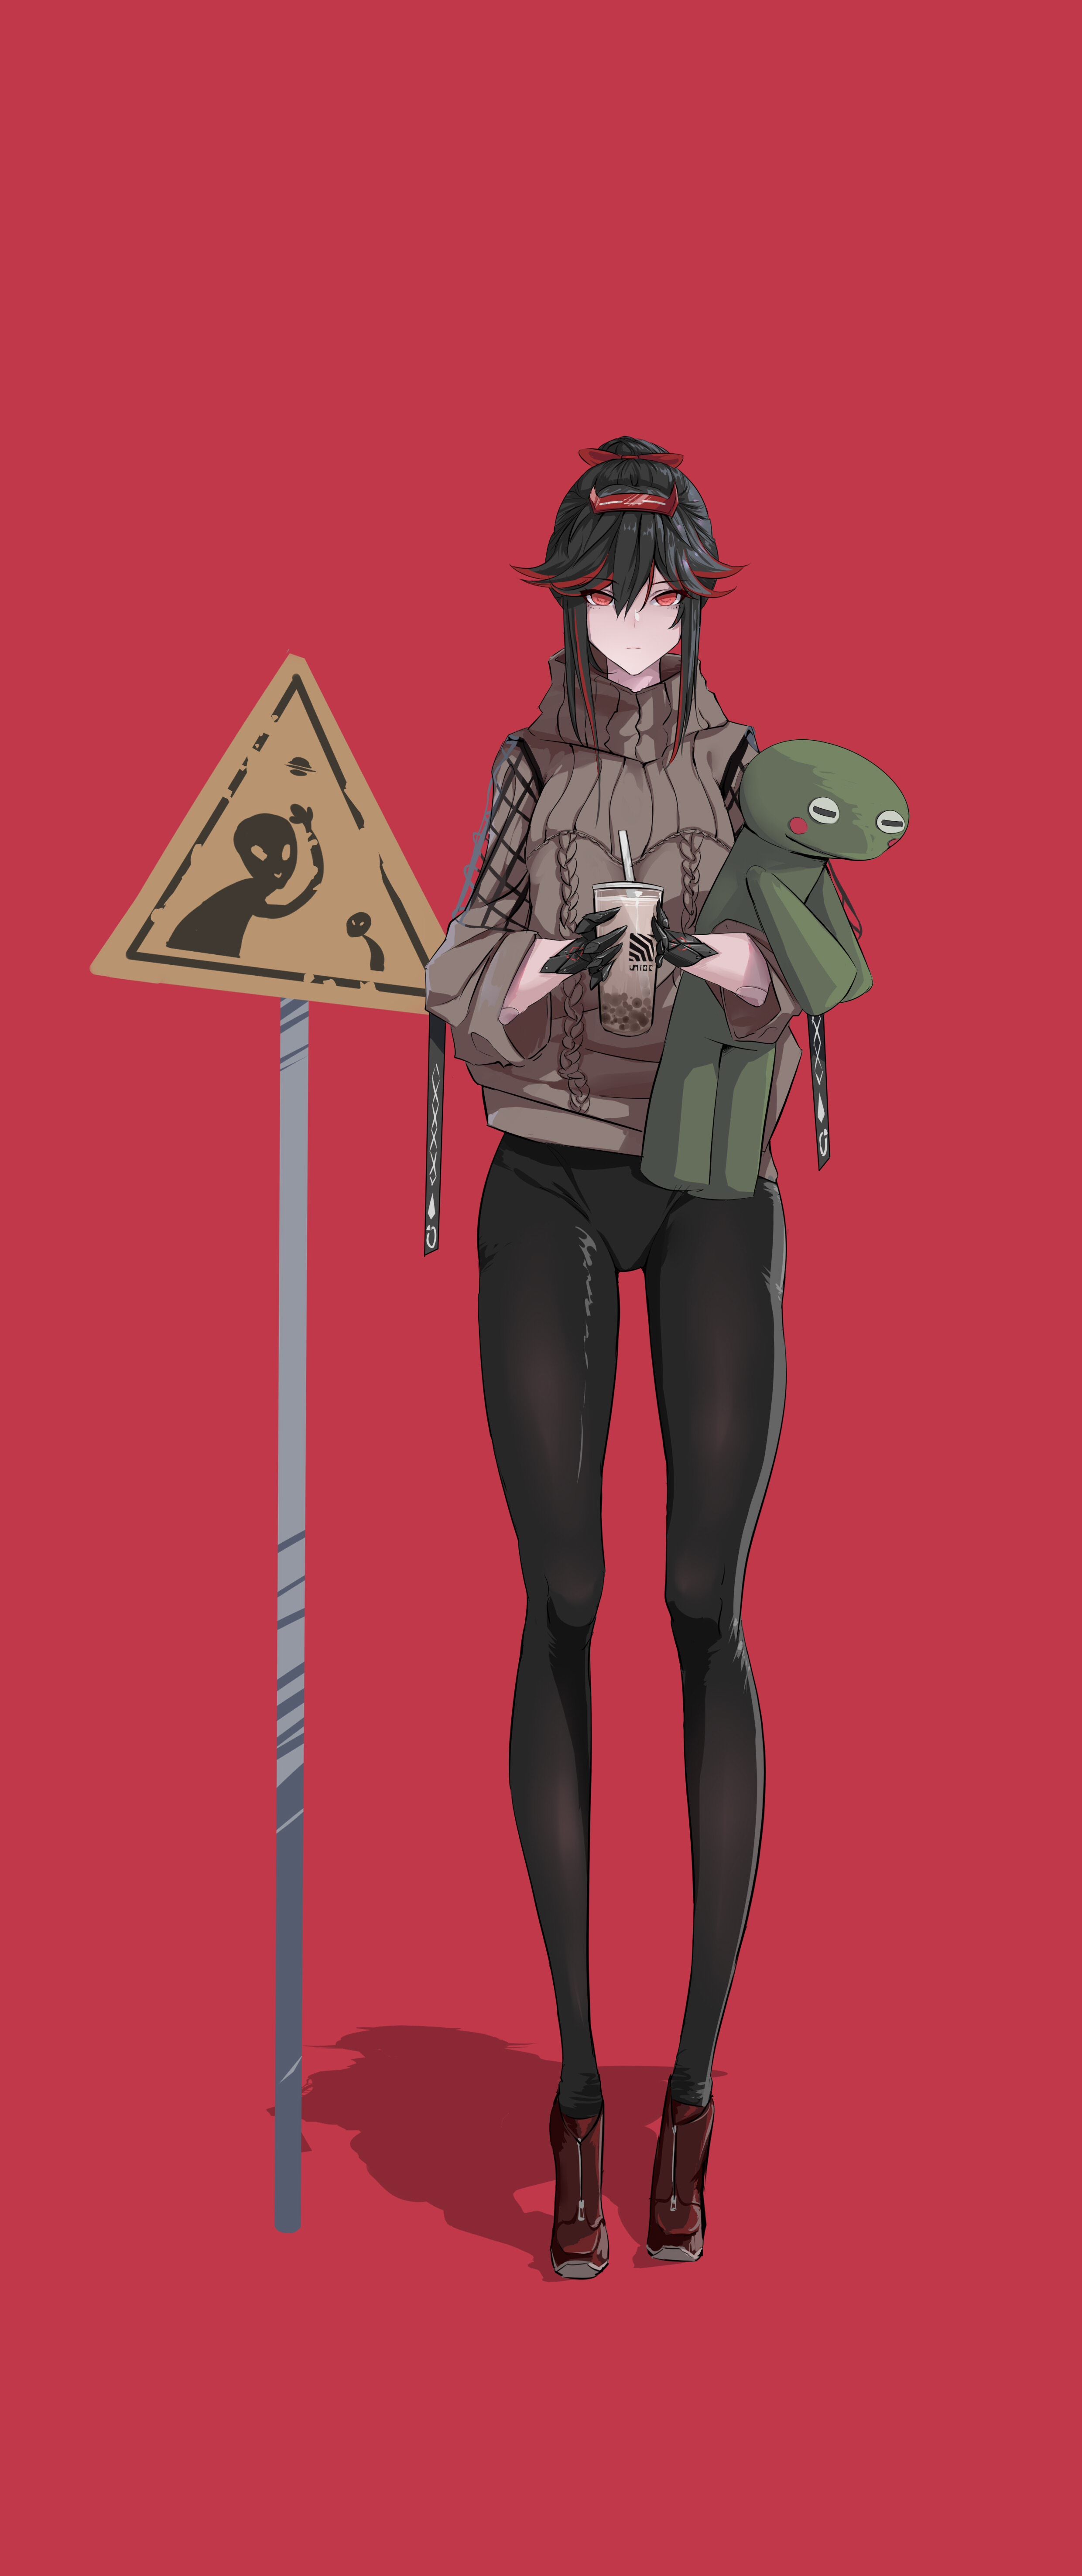 Anime 2480x5906 ADS_Active Defense Cat drink aliens frontal view road sign Punishing: Gray Raven anime girls women simple background Pixiv legs skinny sign red eyes anime red background